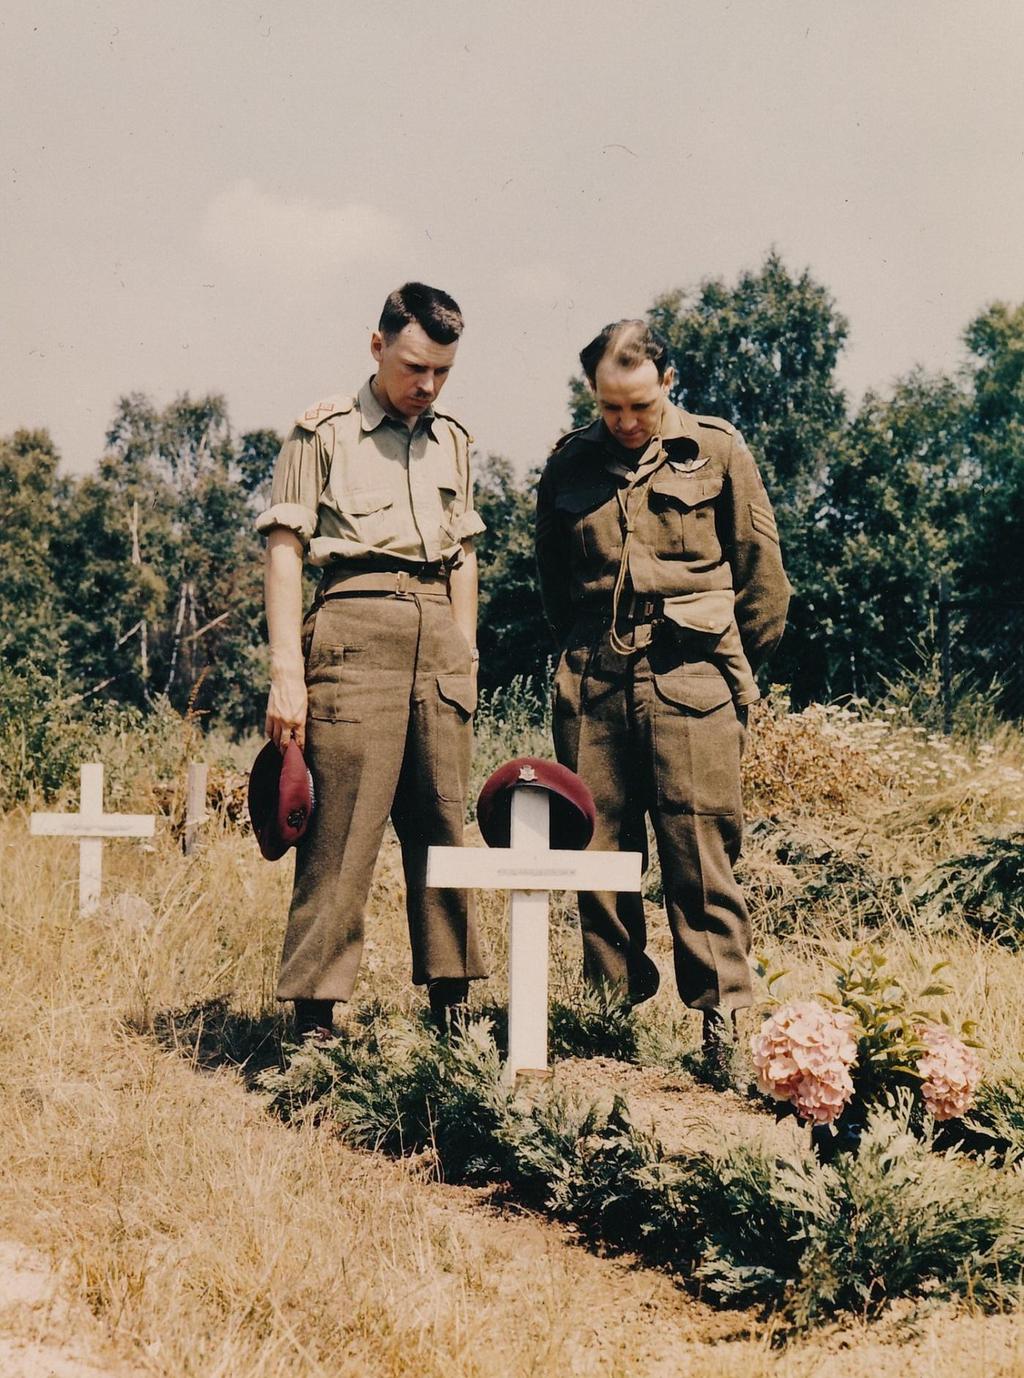 Lt. Richer (L) standing at the gravesite of Lt. Col.